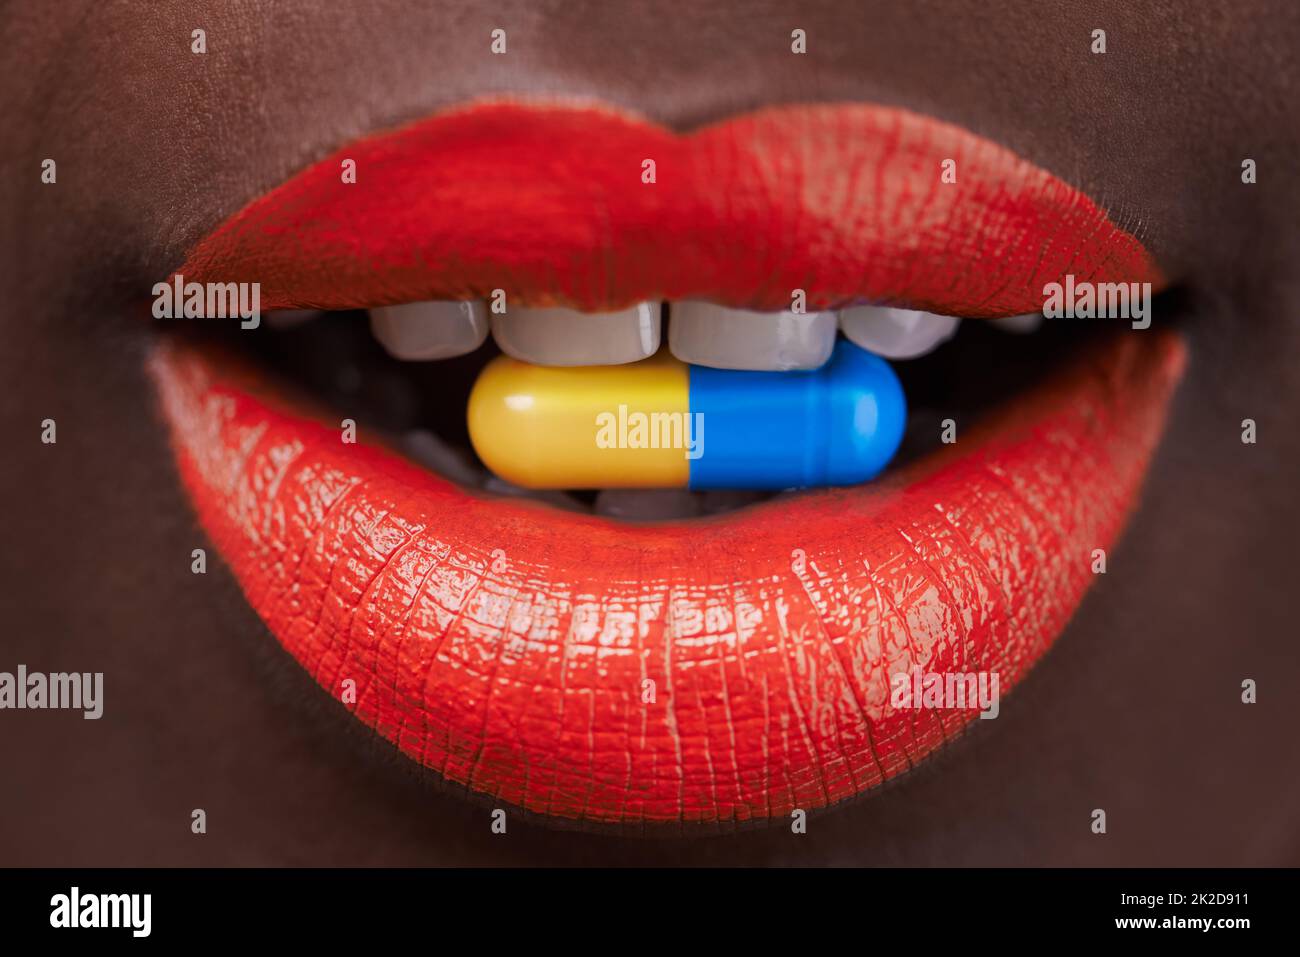 Taking a trip. Cropped view of an african woman with bright red lips with a capsule in her mouth. Stock Photo